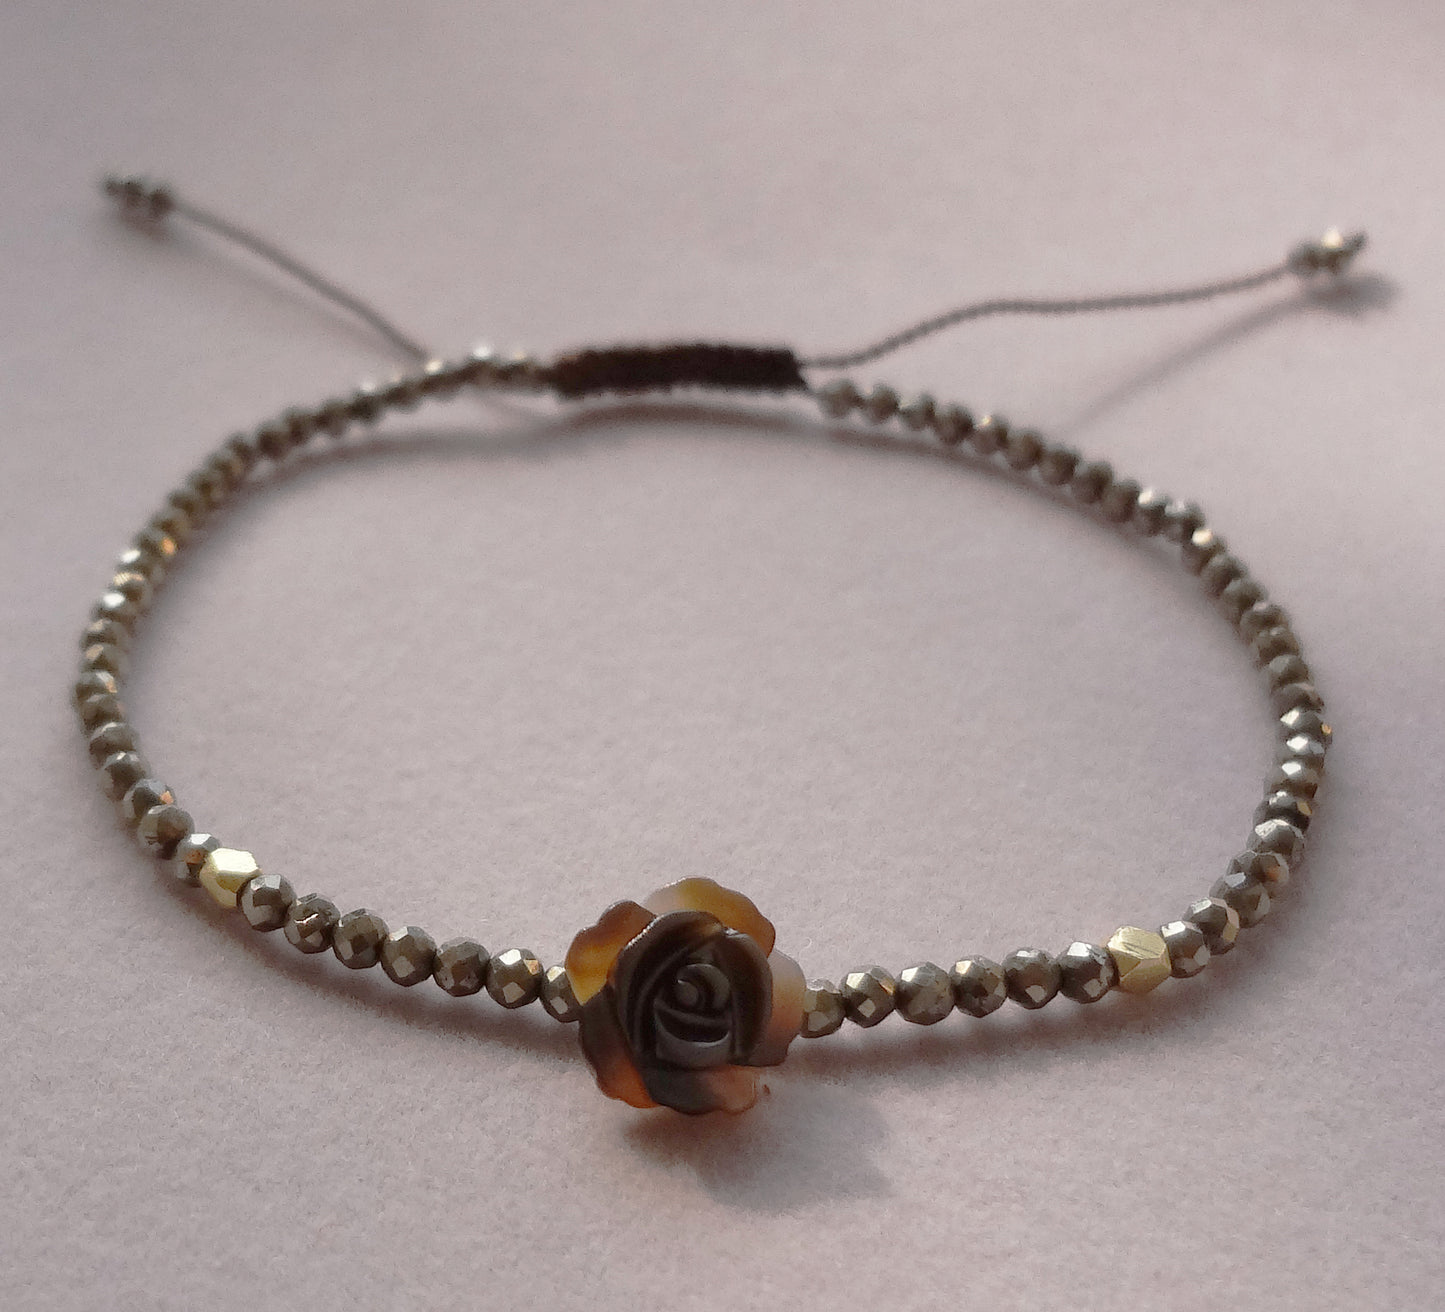 Chocolate Mother of Pearl Rose Bracelet